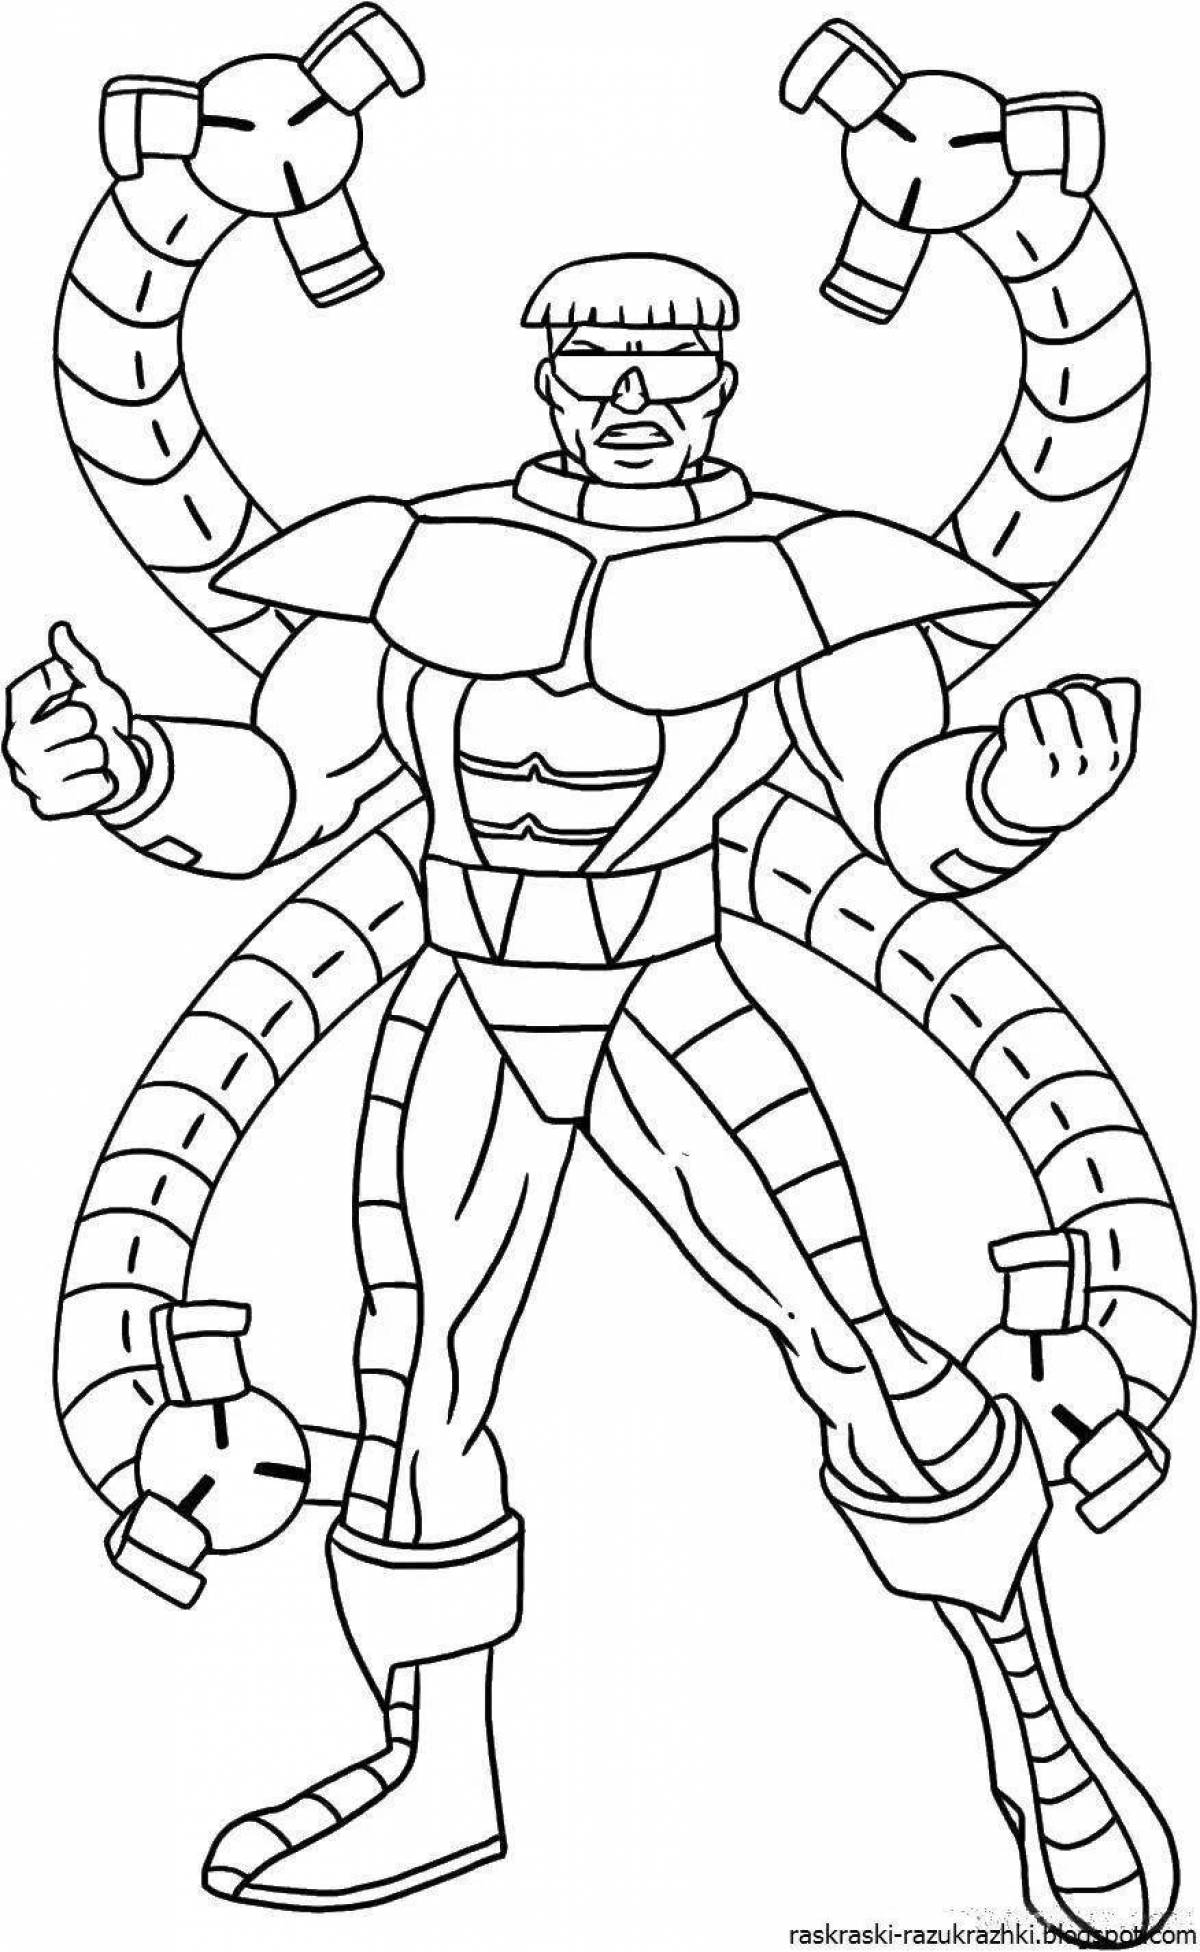 Live superheroes coloring book for kids 5-6 years old